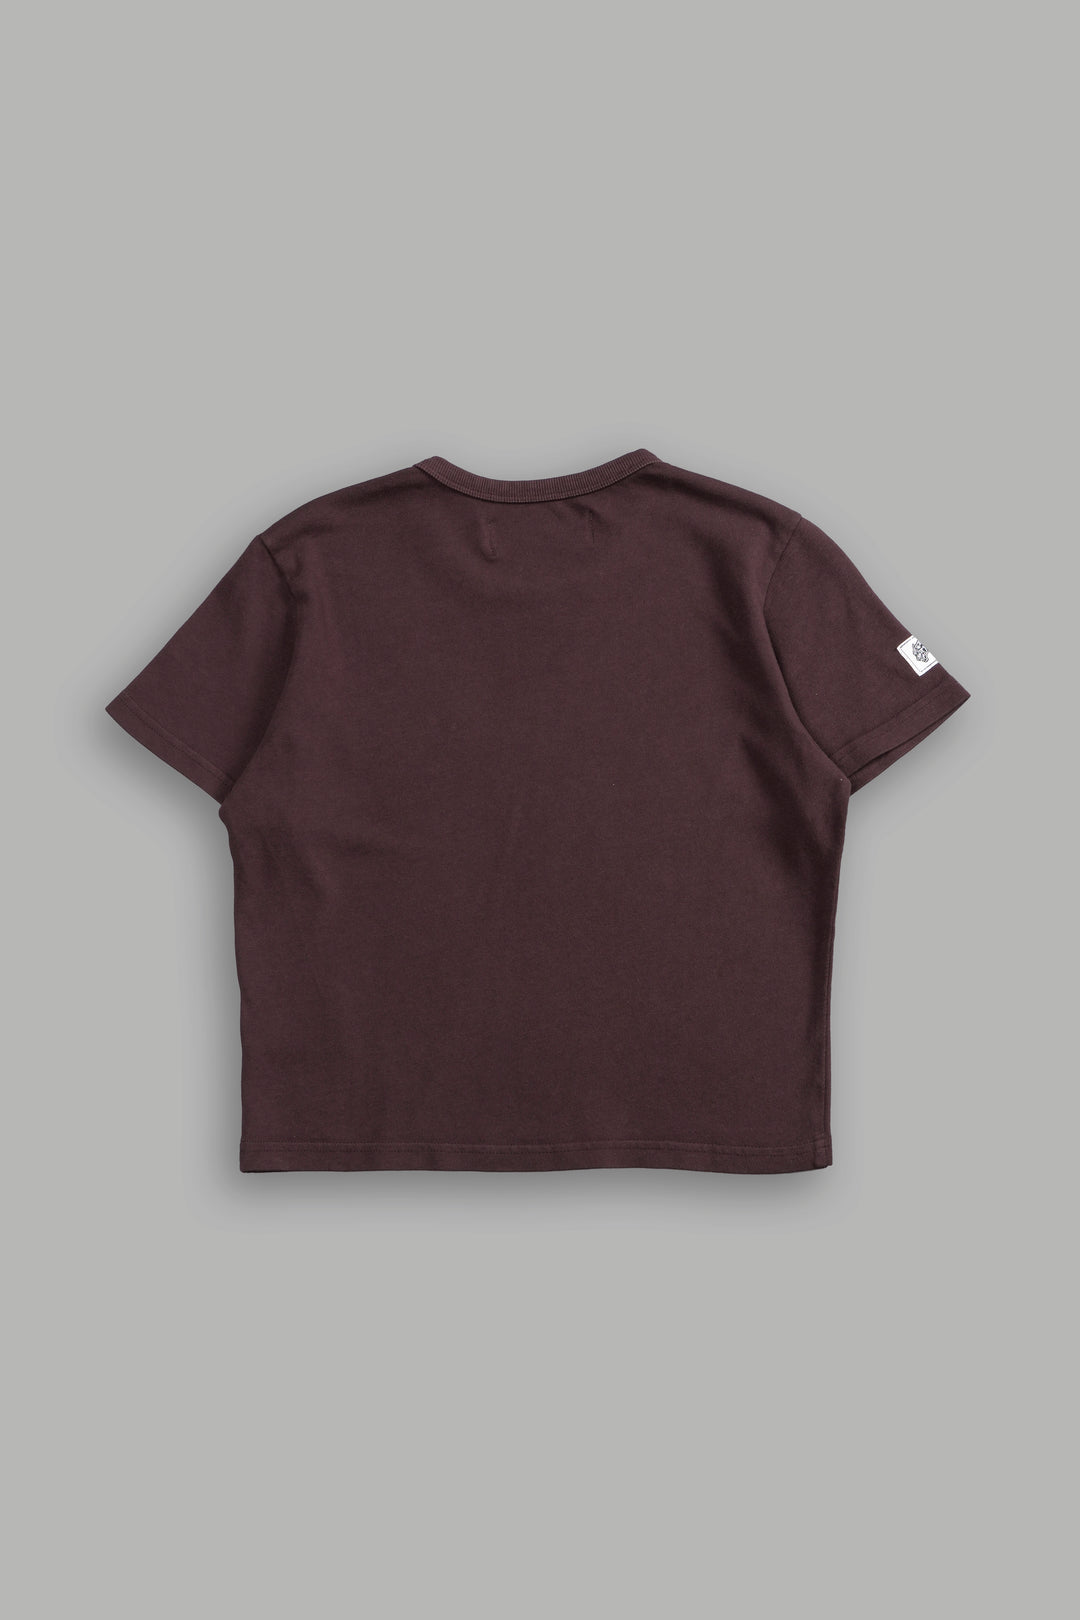 Close To The Heart "Timeless" Tee in Darc Garnet